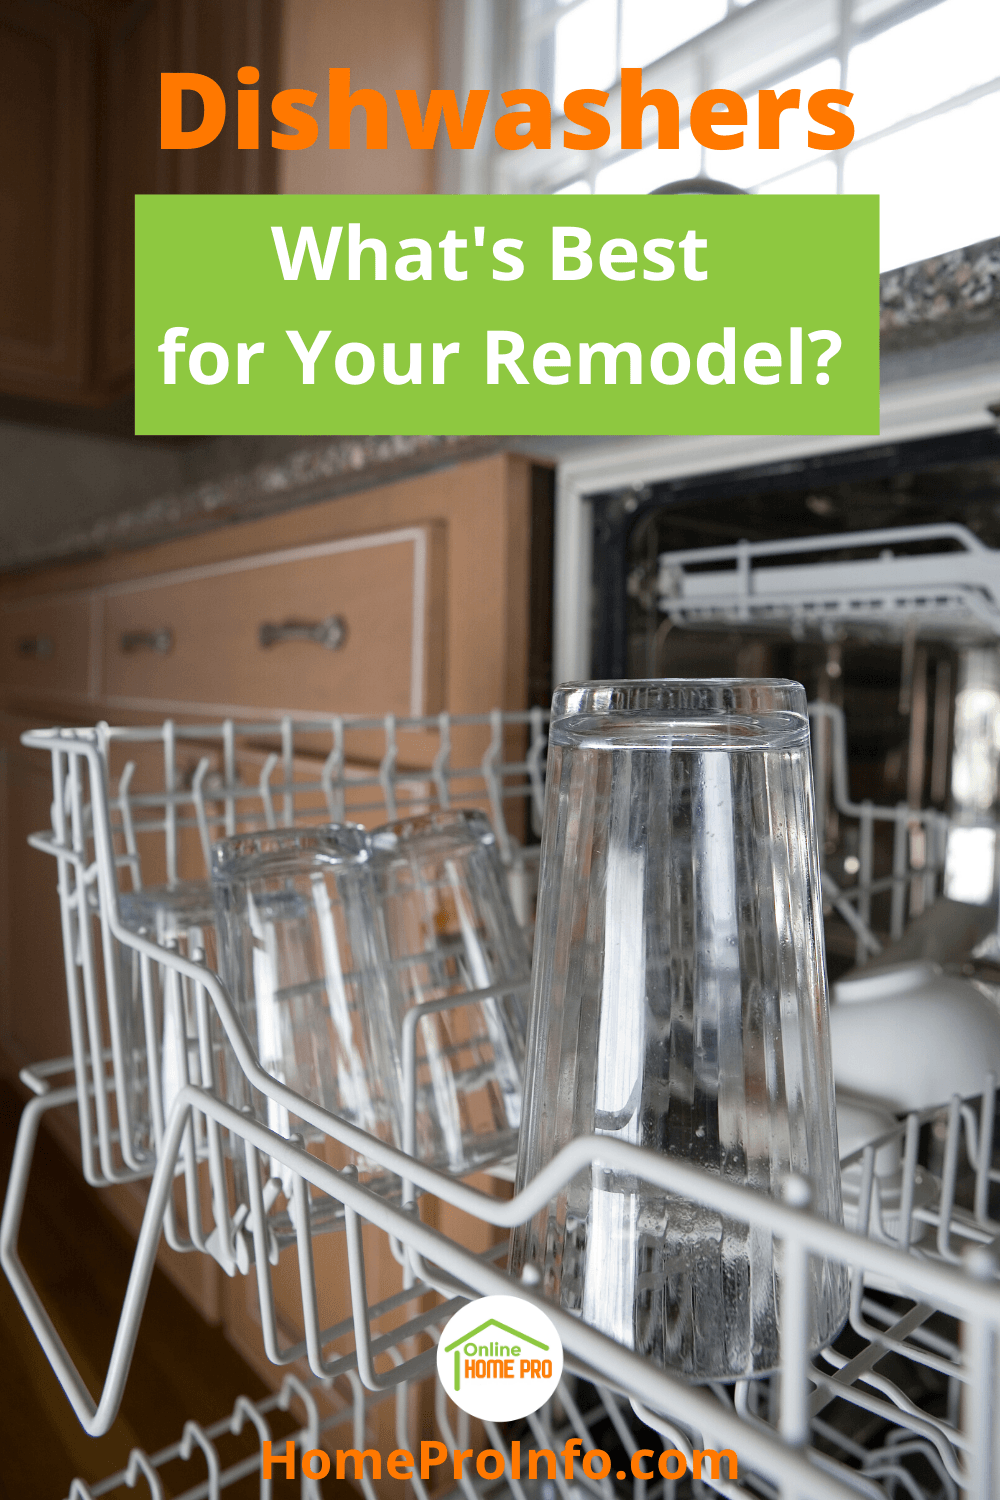 dishwashers and remodeling